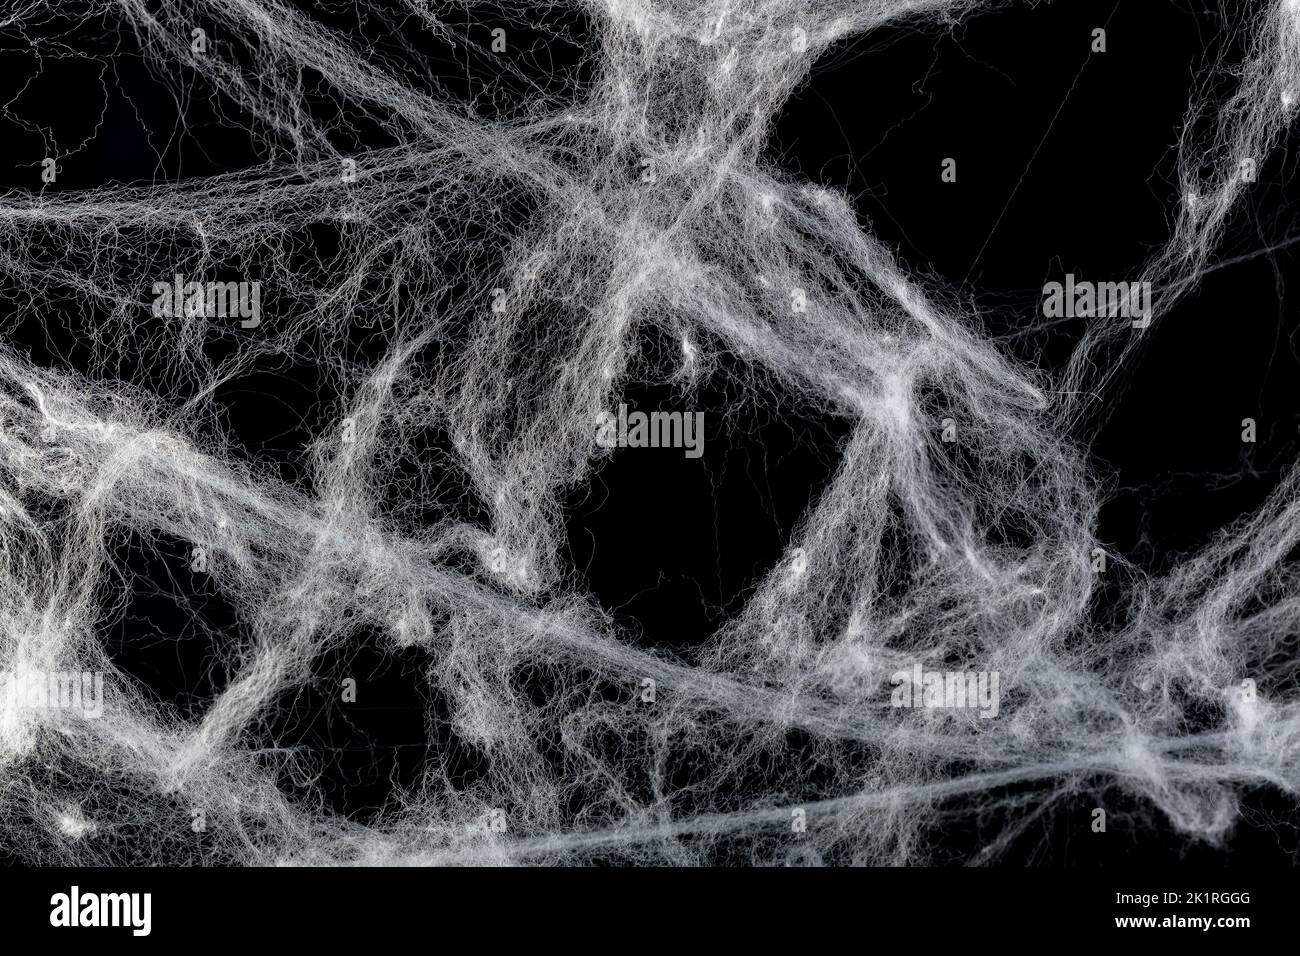 Cobweb or spider's web against a black background, to be used as overlay for Halloween designs Stock Photo